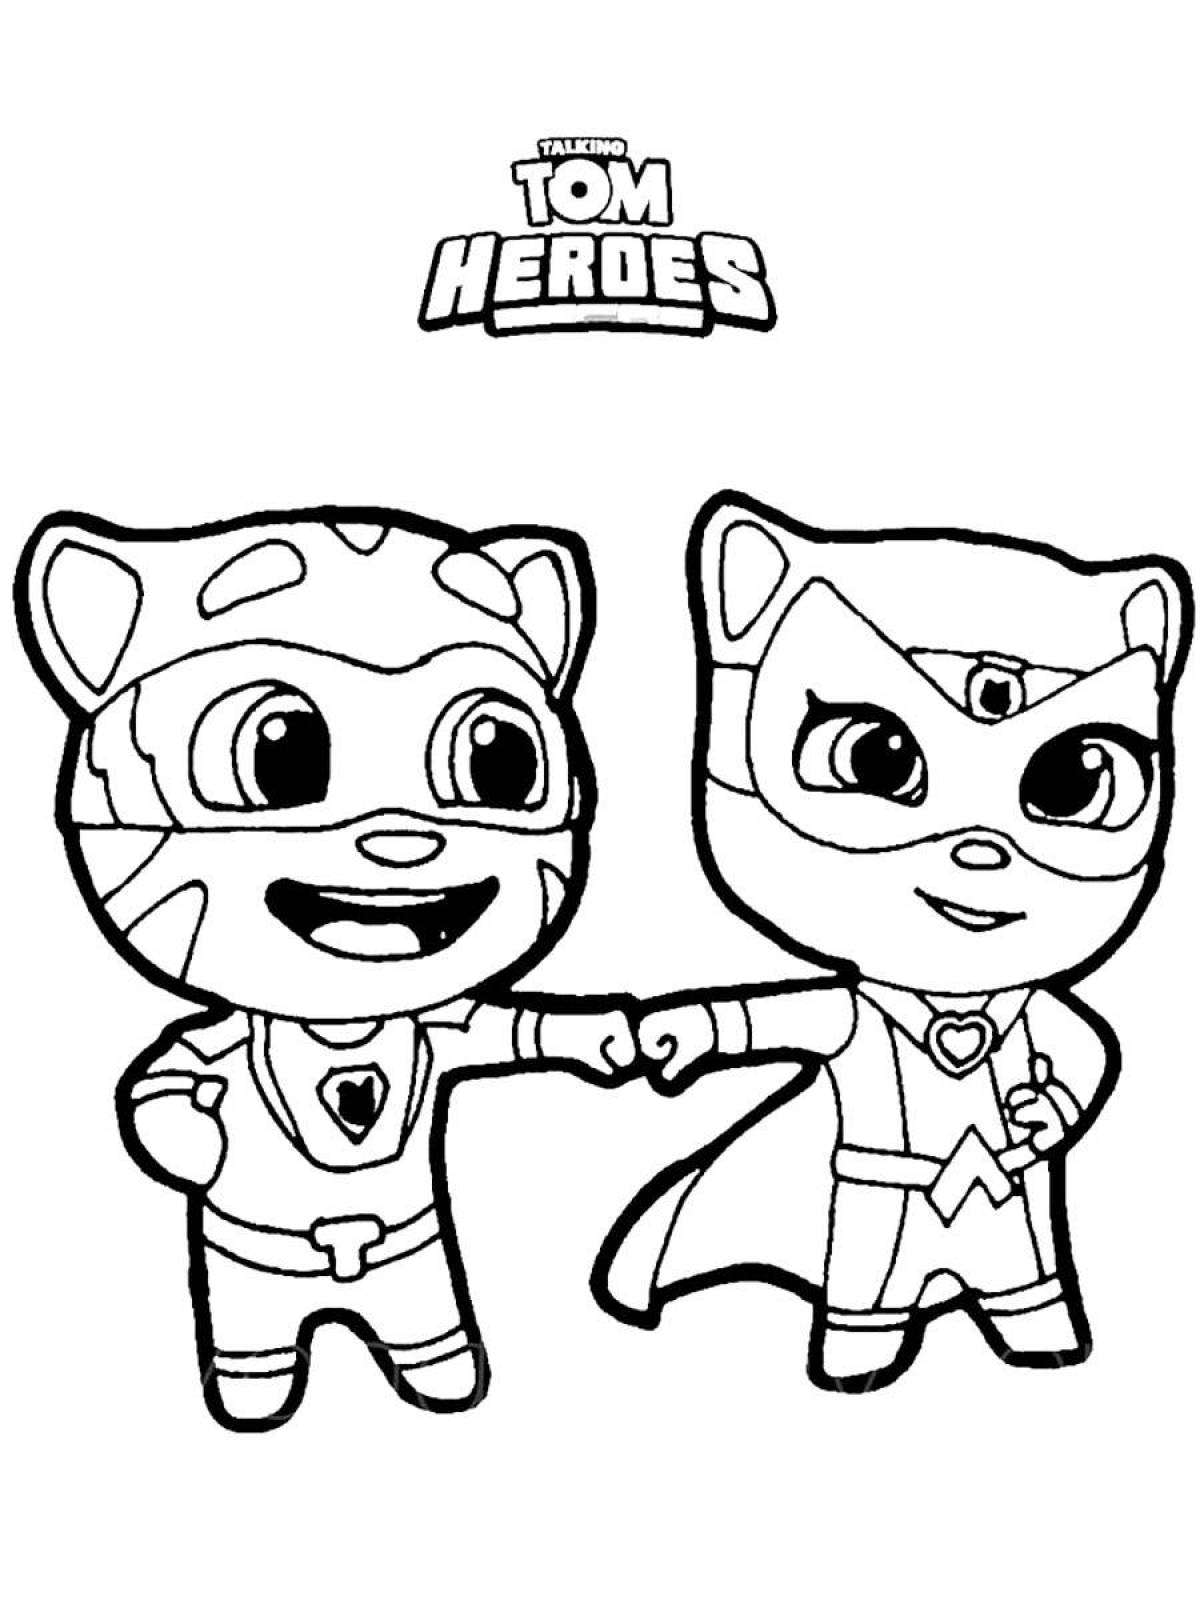 Talking Tom coloring page